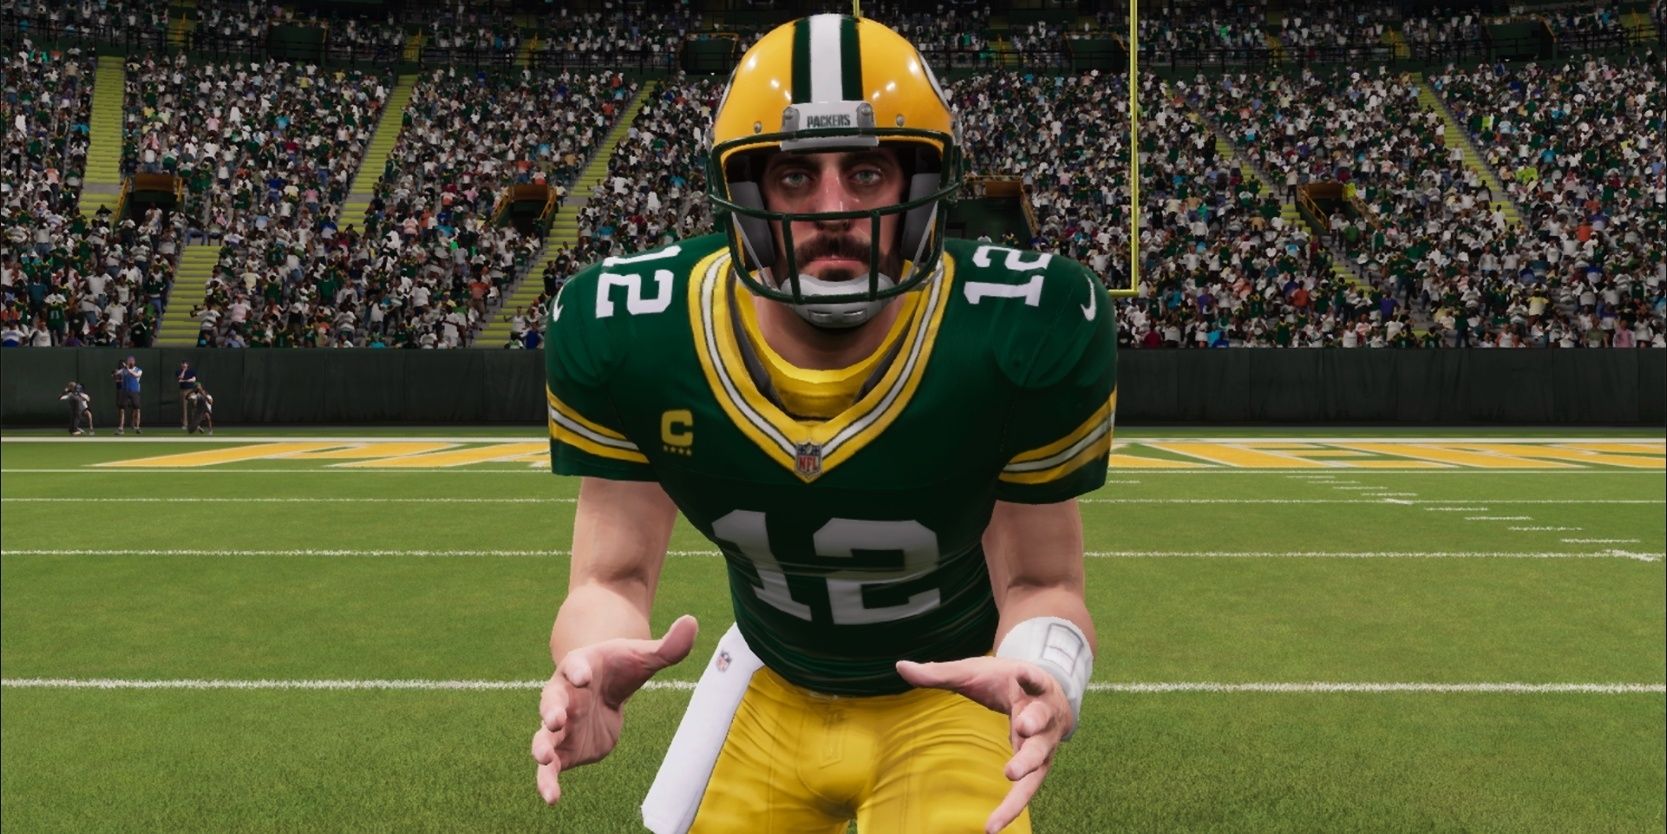 Aaron Rodgers about to receive the snap in Madden NFL 21